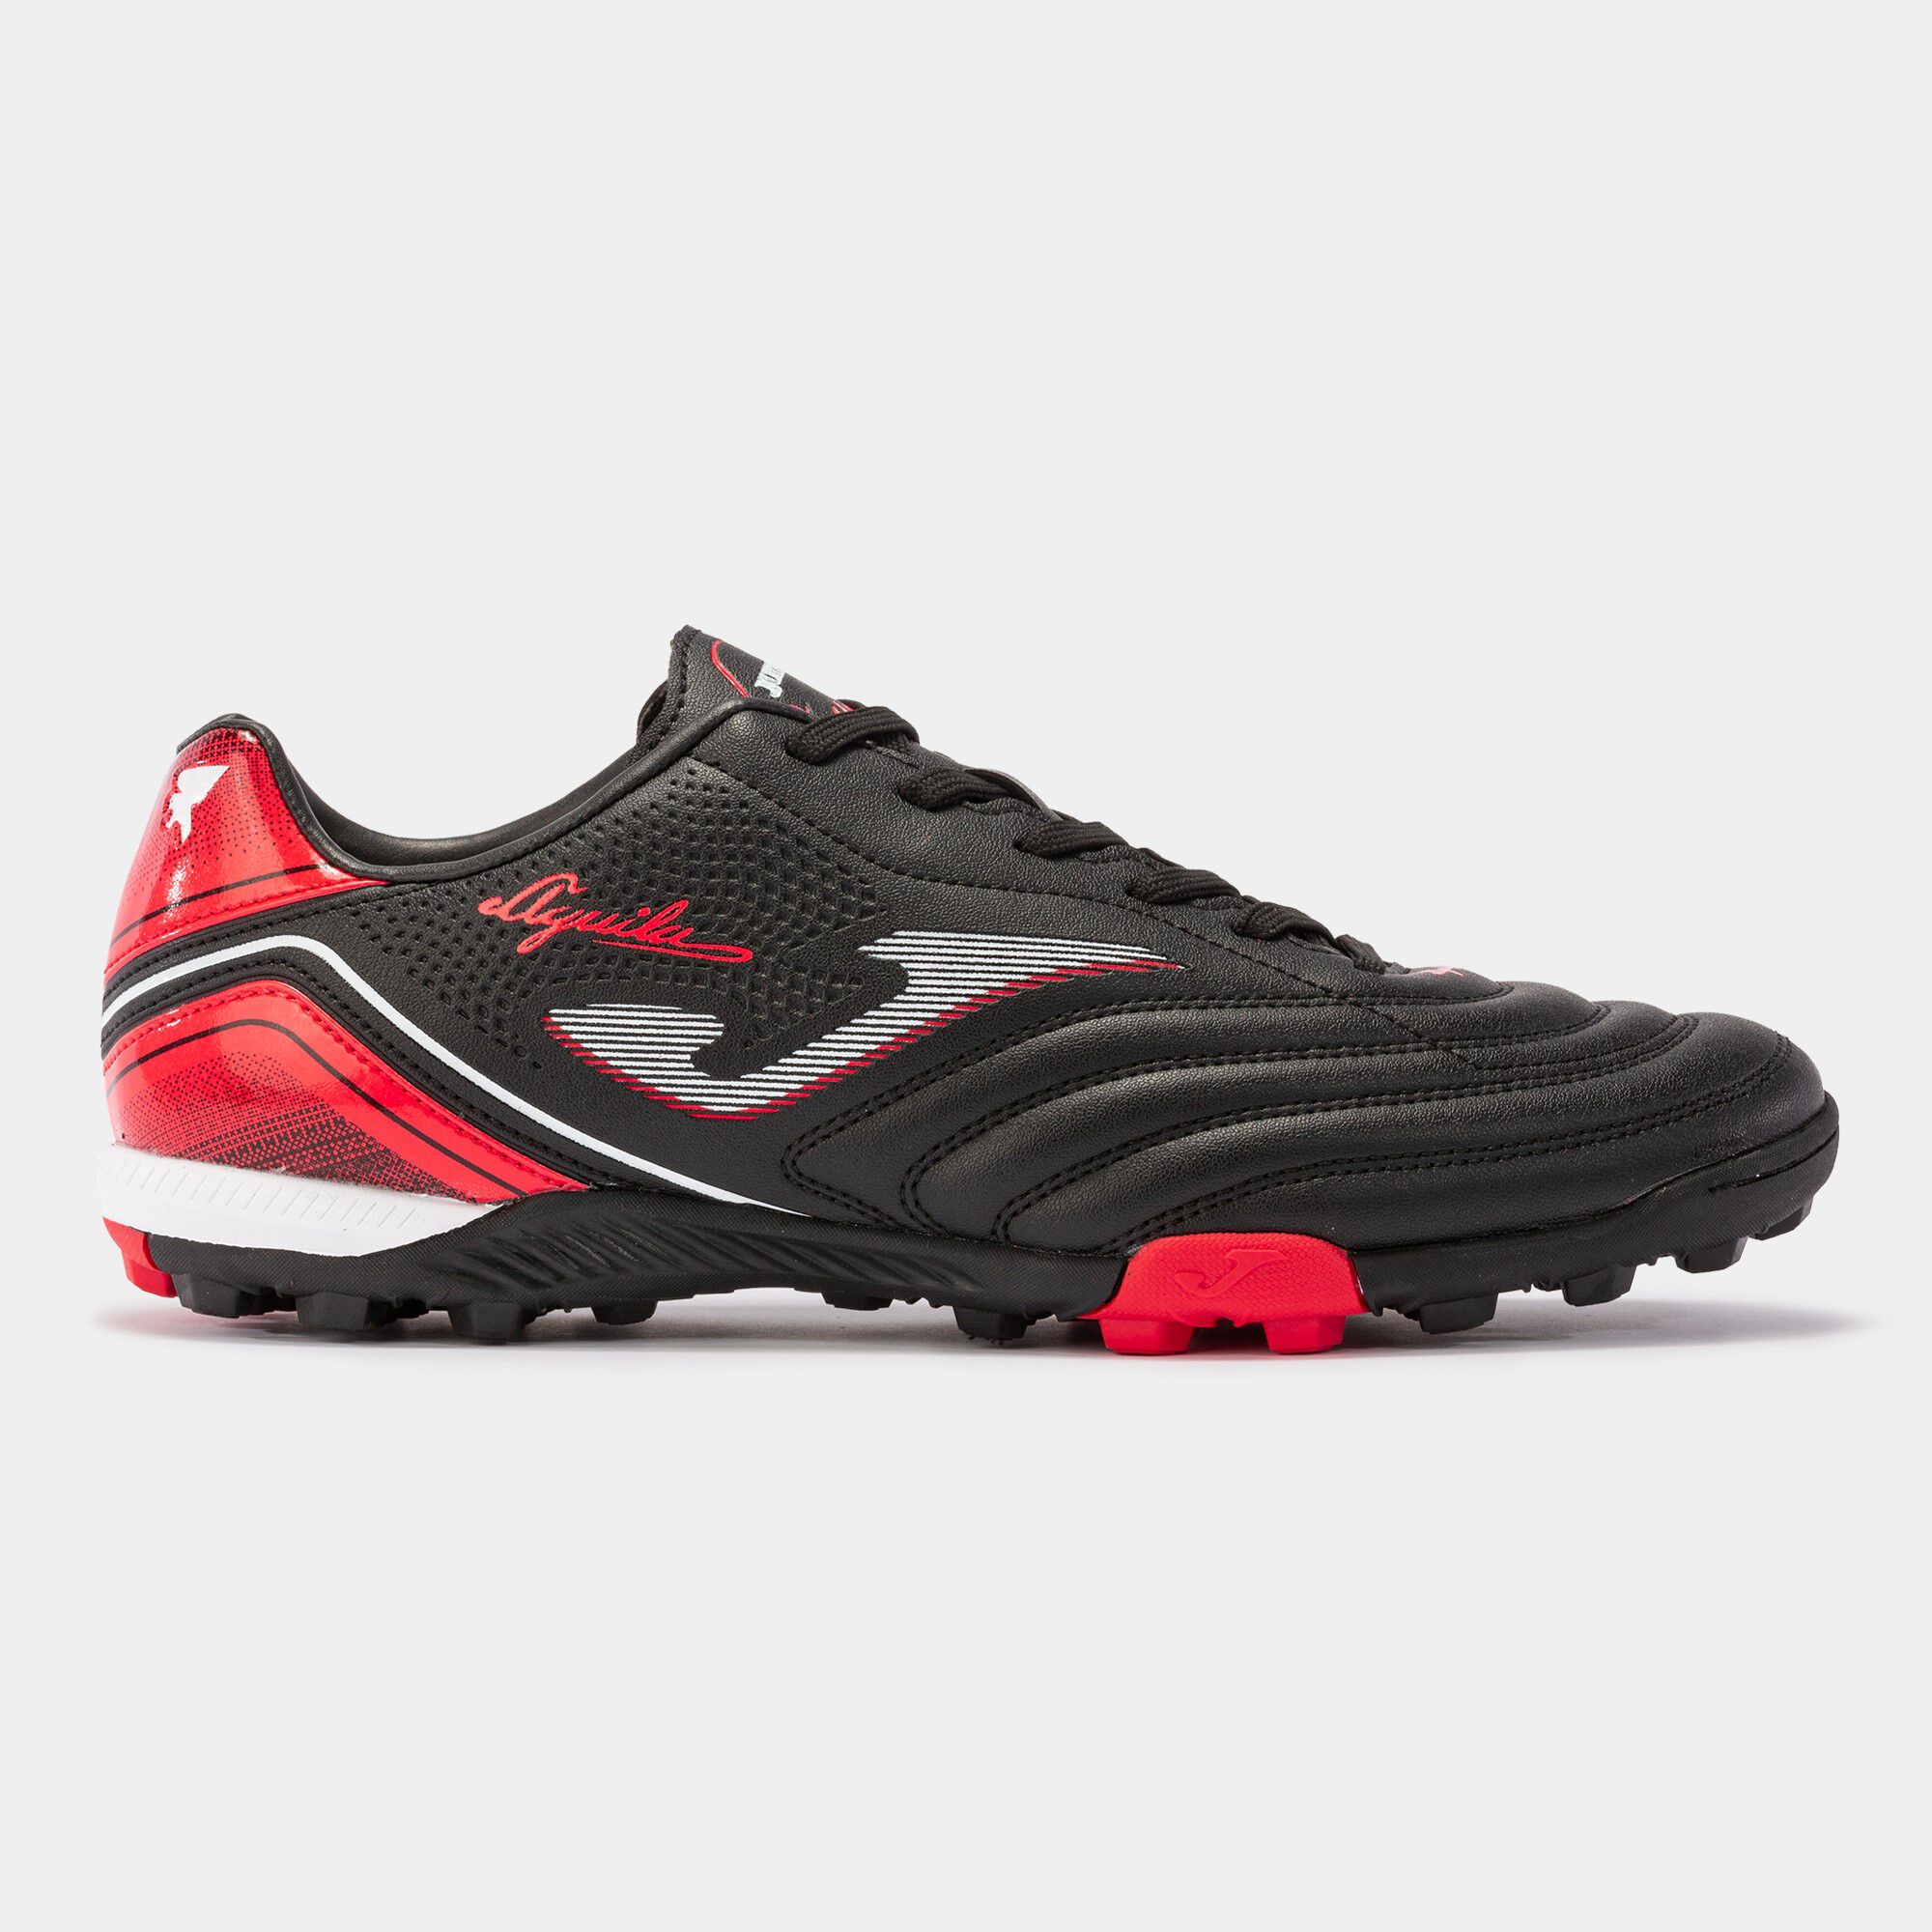 FOOTBALL BOOTS AGUILA 22 TURF BLACK RED